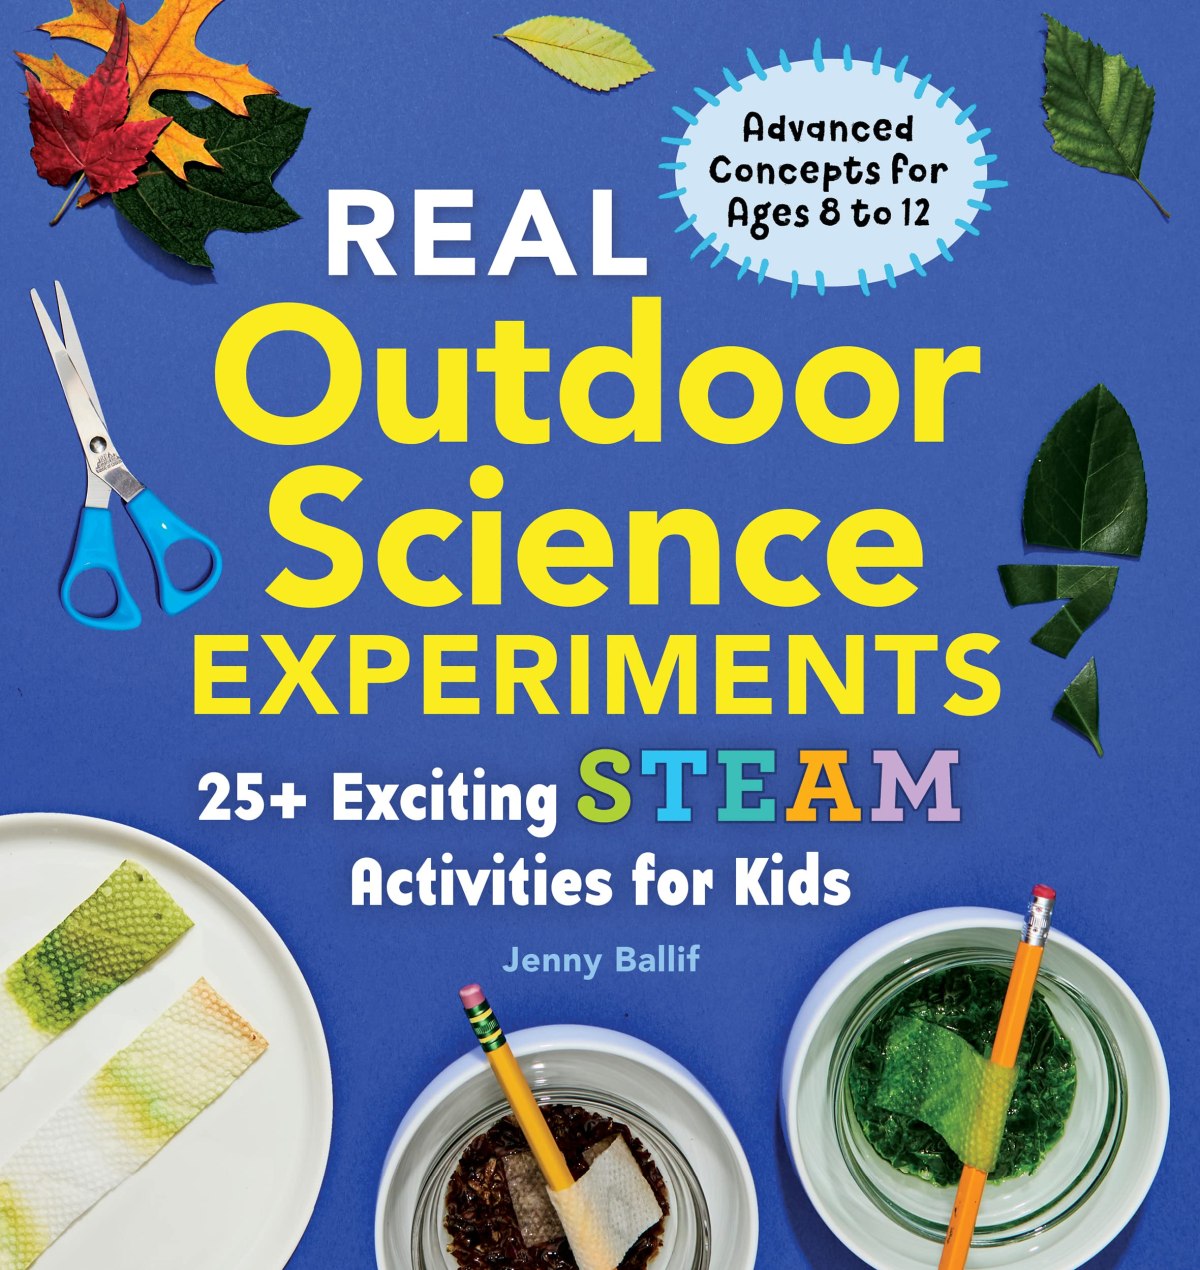 book cover featuring experimentation and crafting tools, including leaves, scissors, strips of paper towels suspended over small bowls with pencils, with the text 'Real outdoor science experiments, 25+ exciting STEAM activities for kids; advanced concepts for ages 8 to 12, by Jenny Ballif'